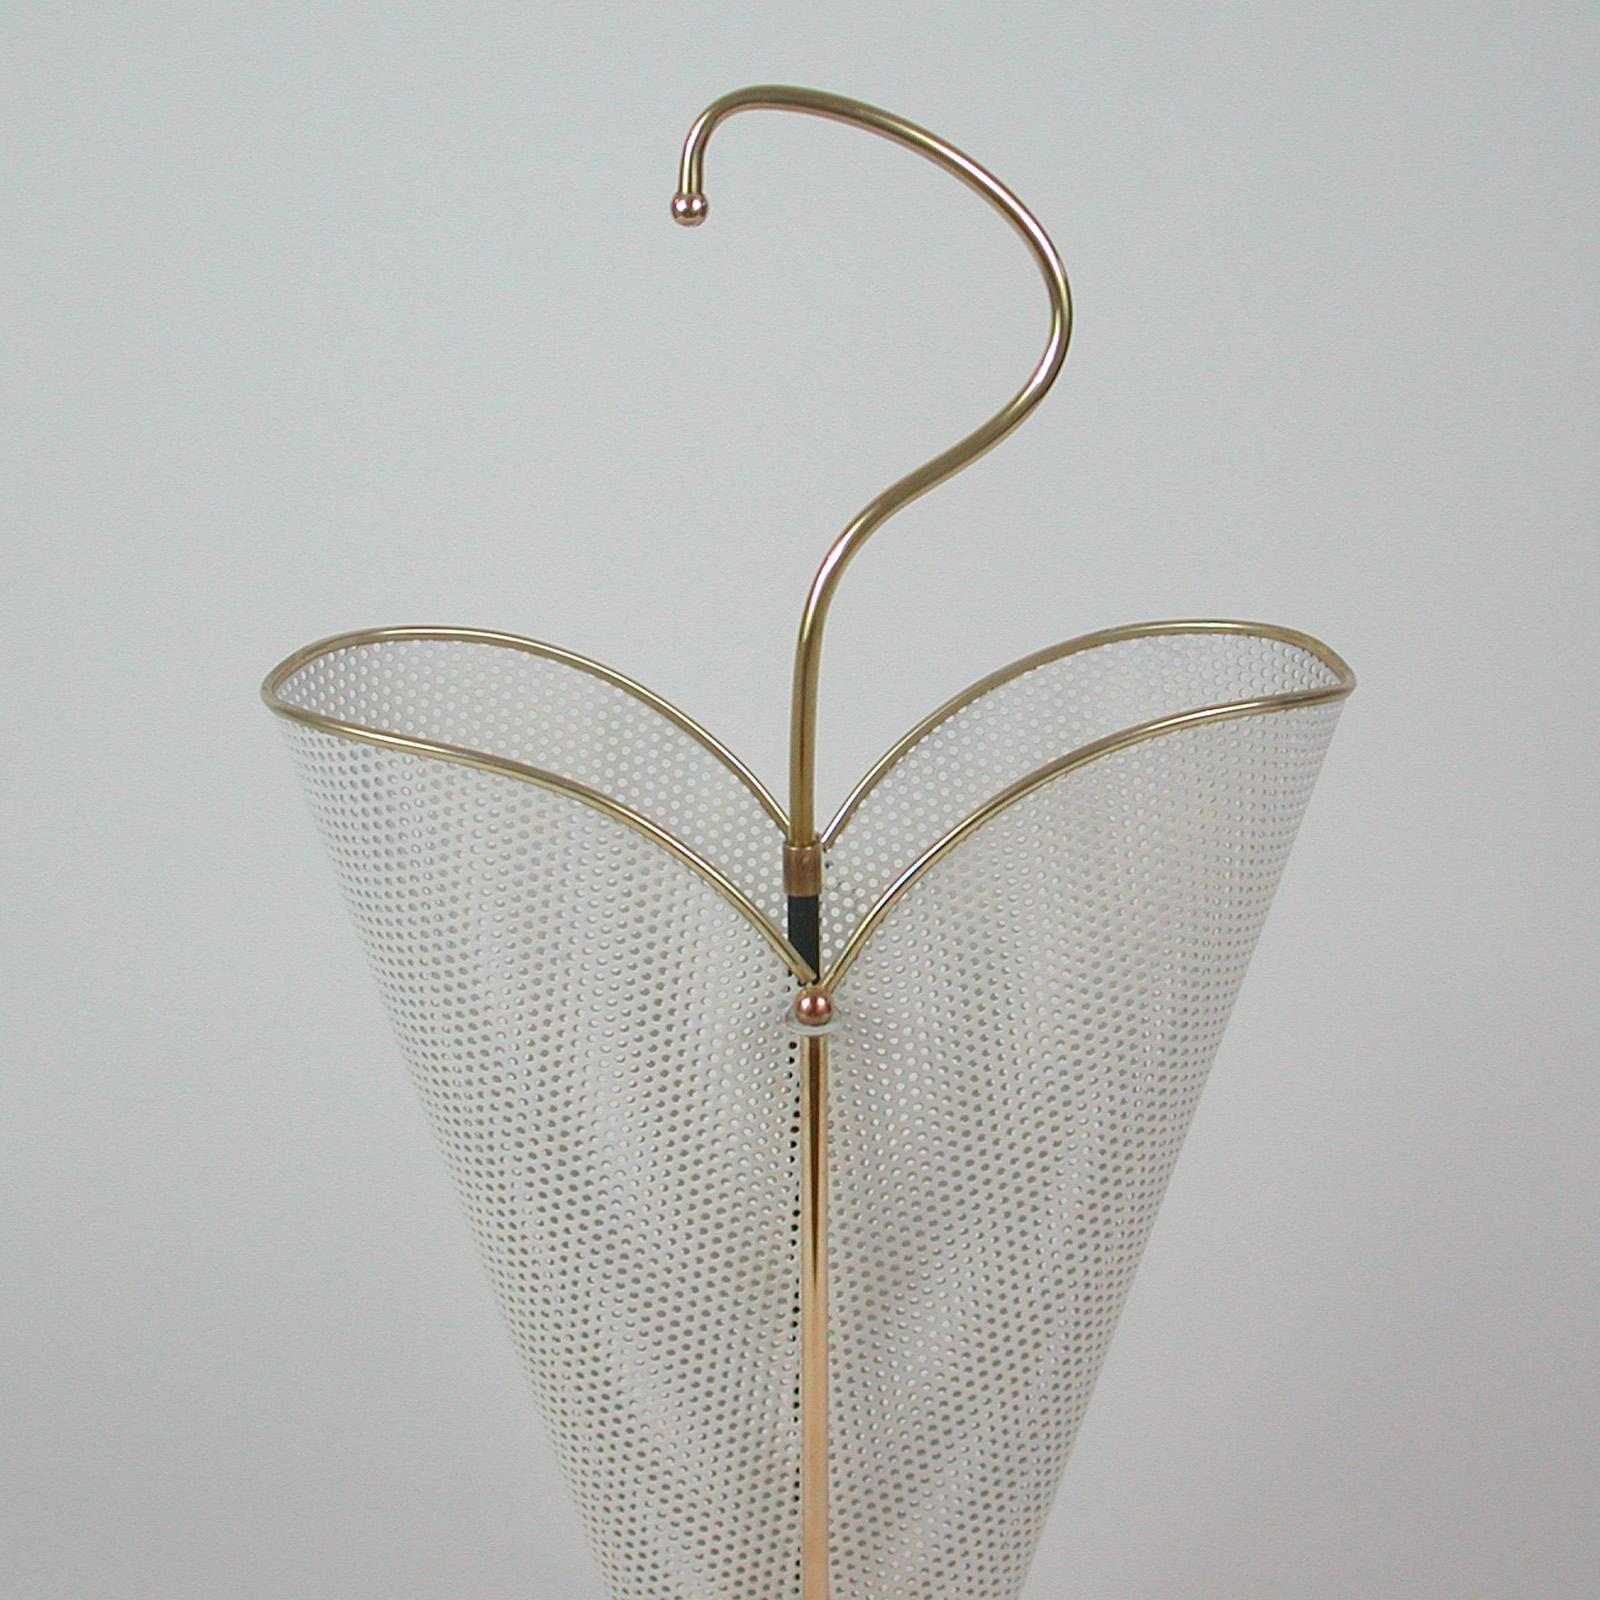 Mid-20th Century French Midcentury Mategot Style White Umbrella Stand, 1950s For Sale